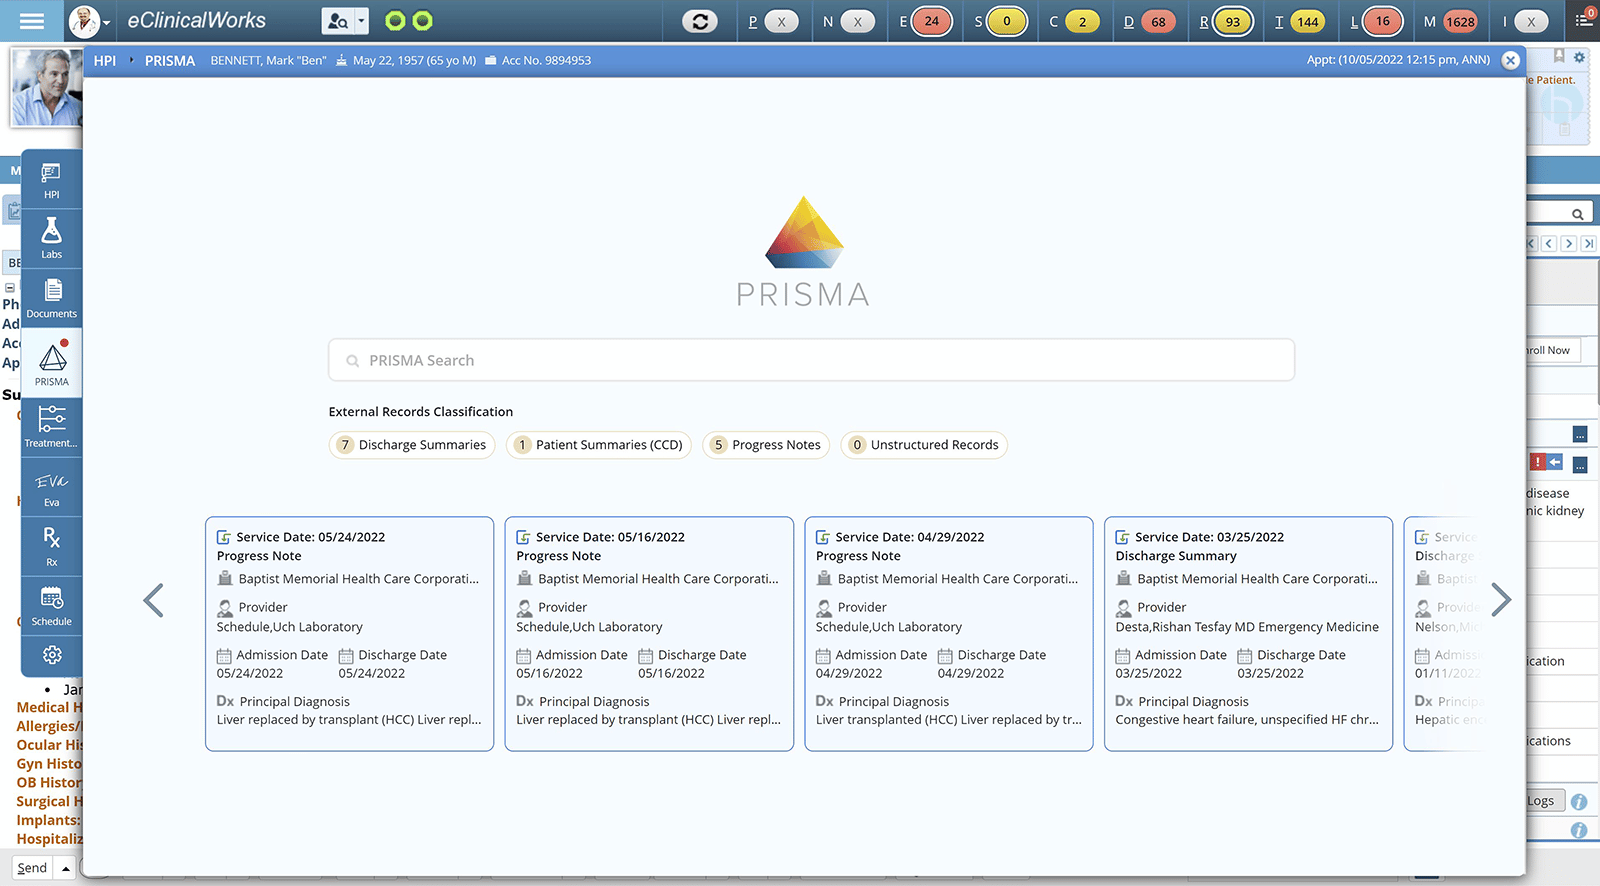 screenshot of prisma in the eClinicalworks EHR